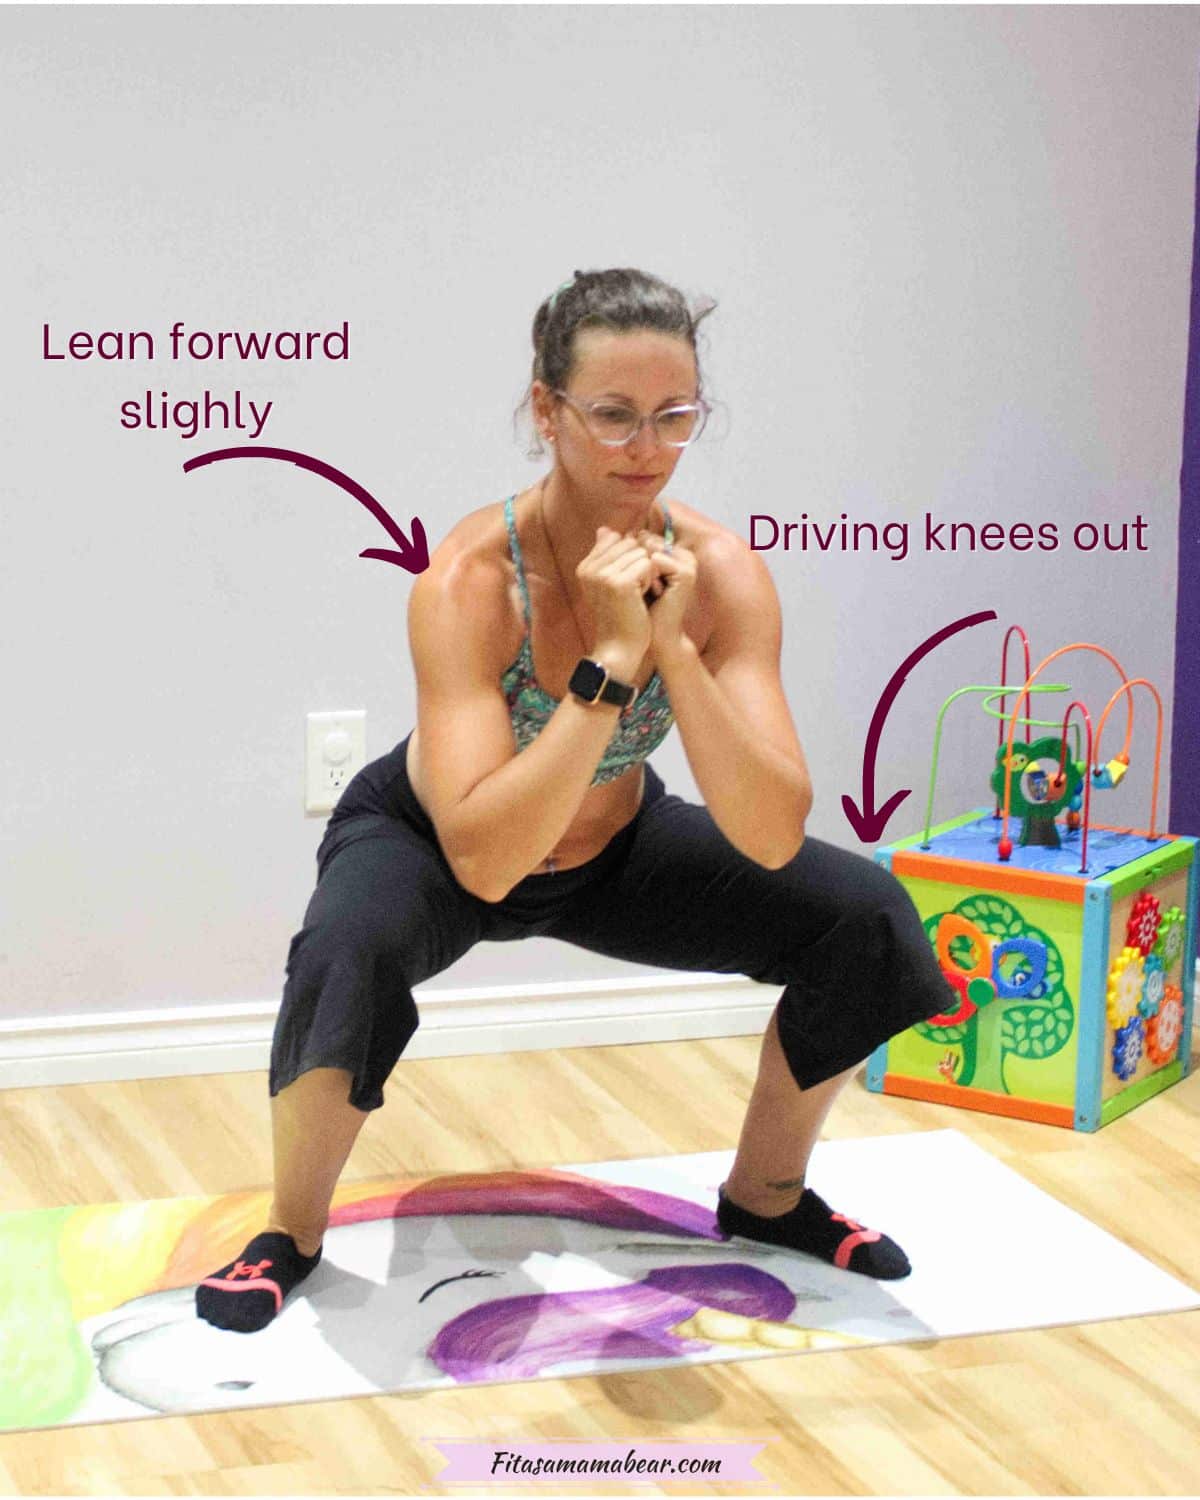 Woman in a sportan bra and black pants side by side, the first image of her in a squat the image ha arrows and text on tips to perform the squat